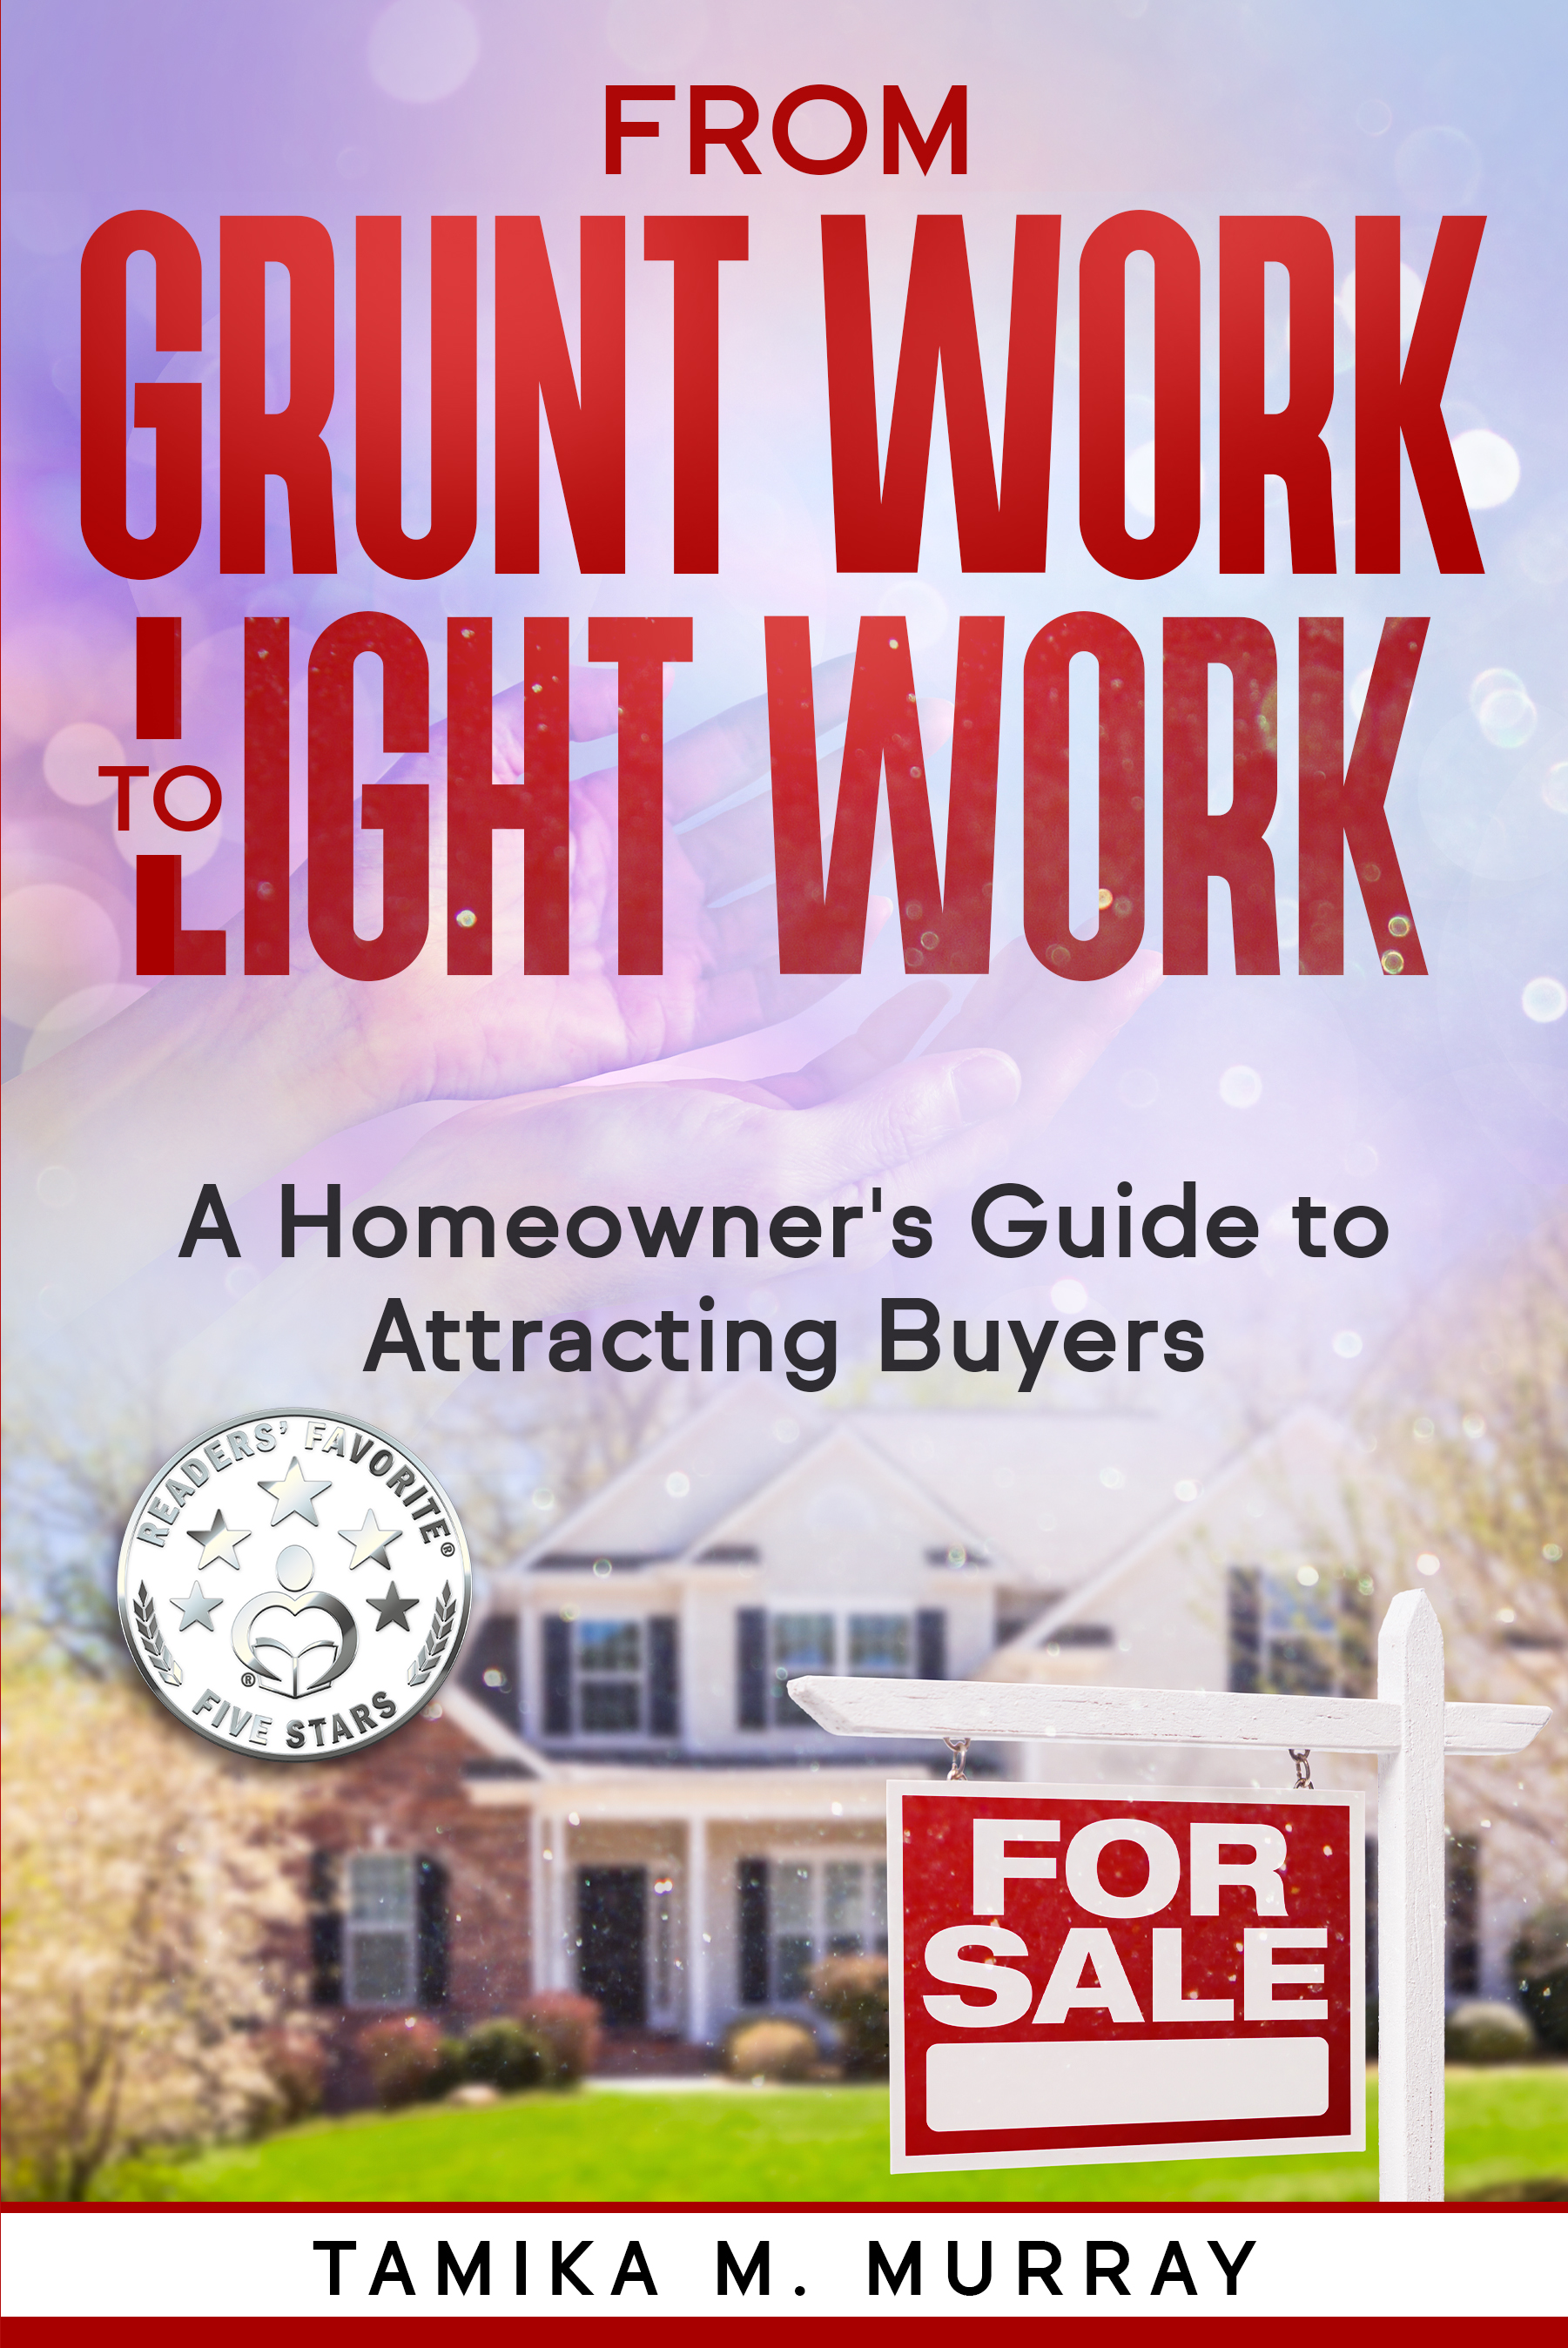 "From Grunt Work to Light Work" Offers Practical New Age Tips for Homeowner’s During the Time of COVID-19